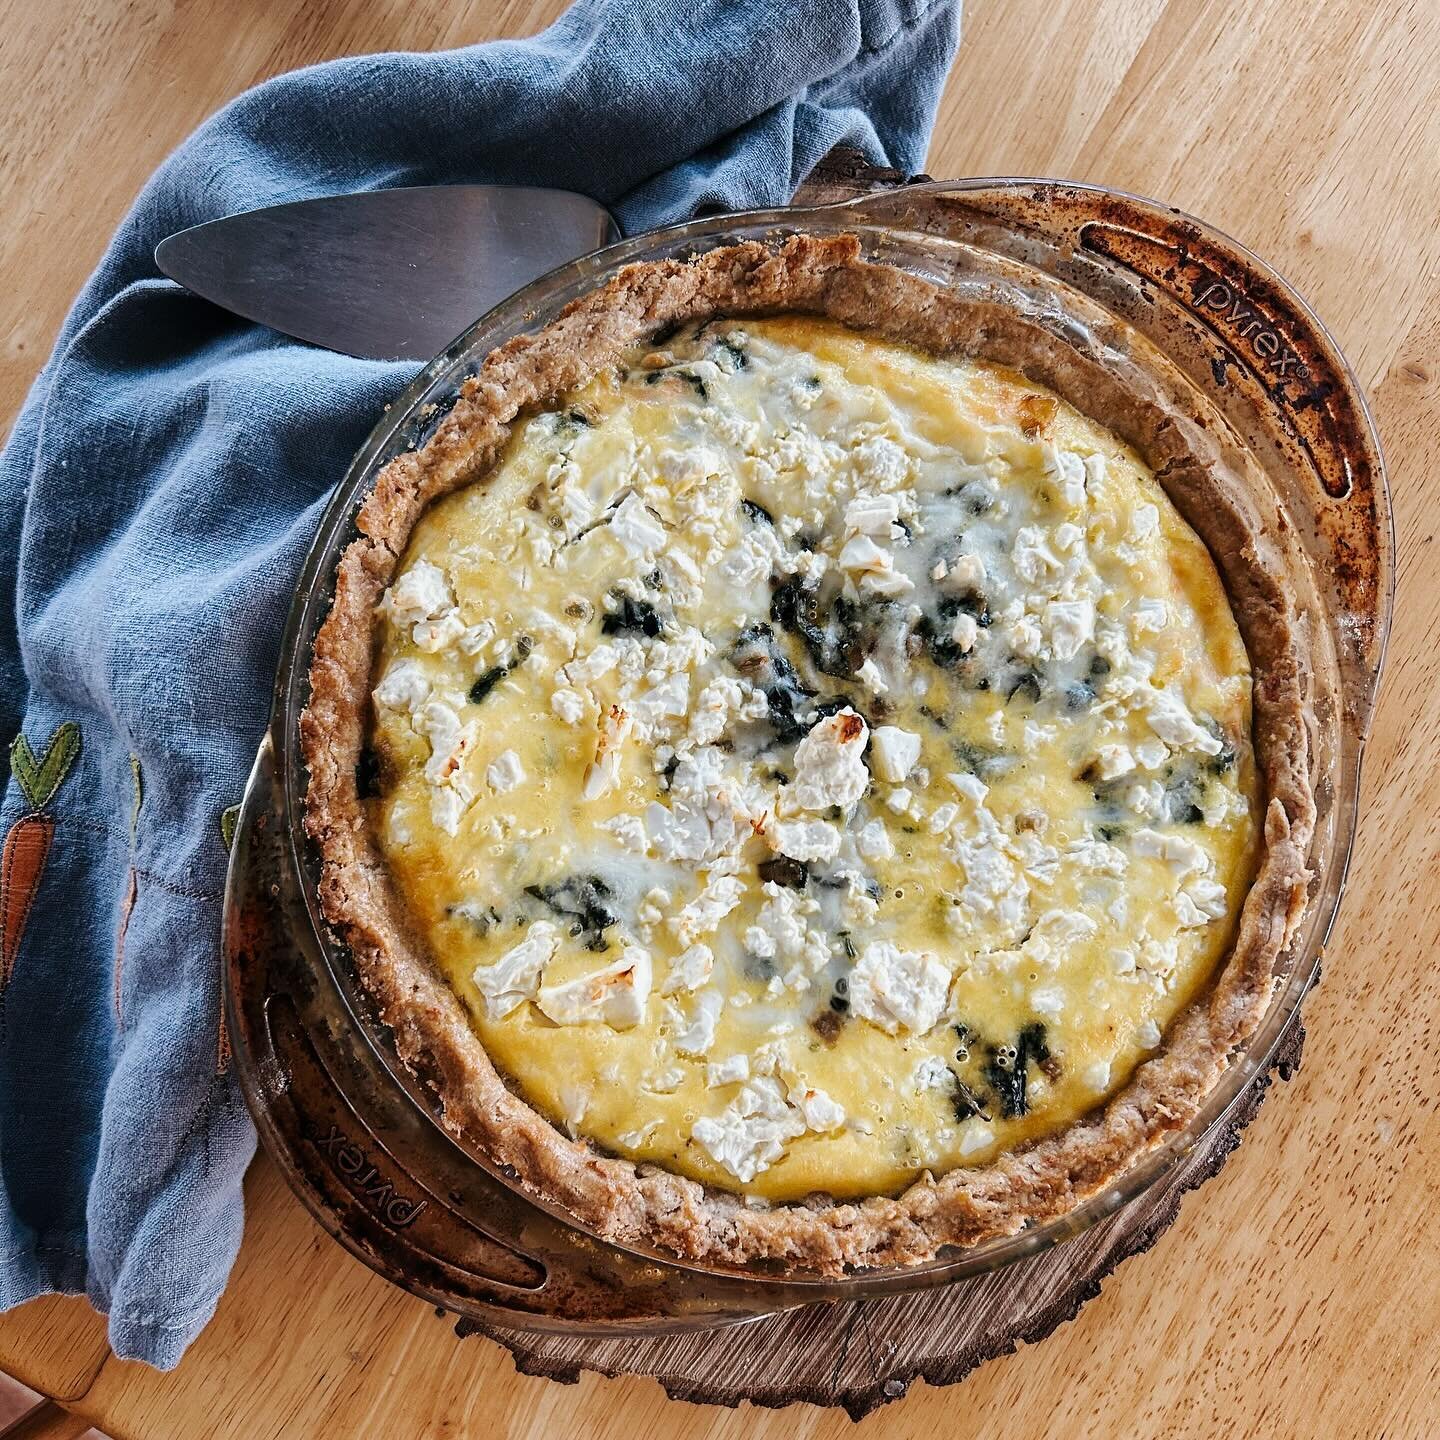 Foraged spring greens + feta quiche. Oh it feels so good to be eating from the land again!

This is a basic spinach &amp; feta quiche recipe but I substituted nettles and sochan (a wild green that&rsquo;s a staple in Cherokee food traditions in our r